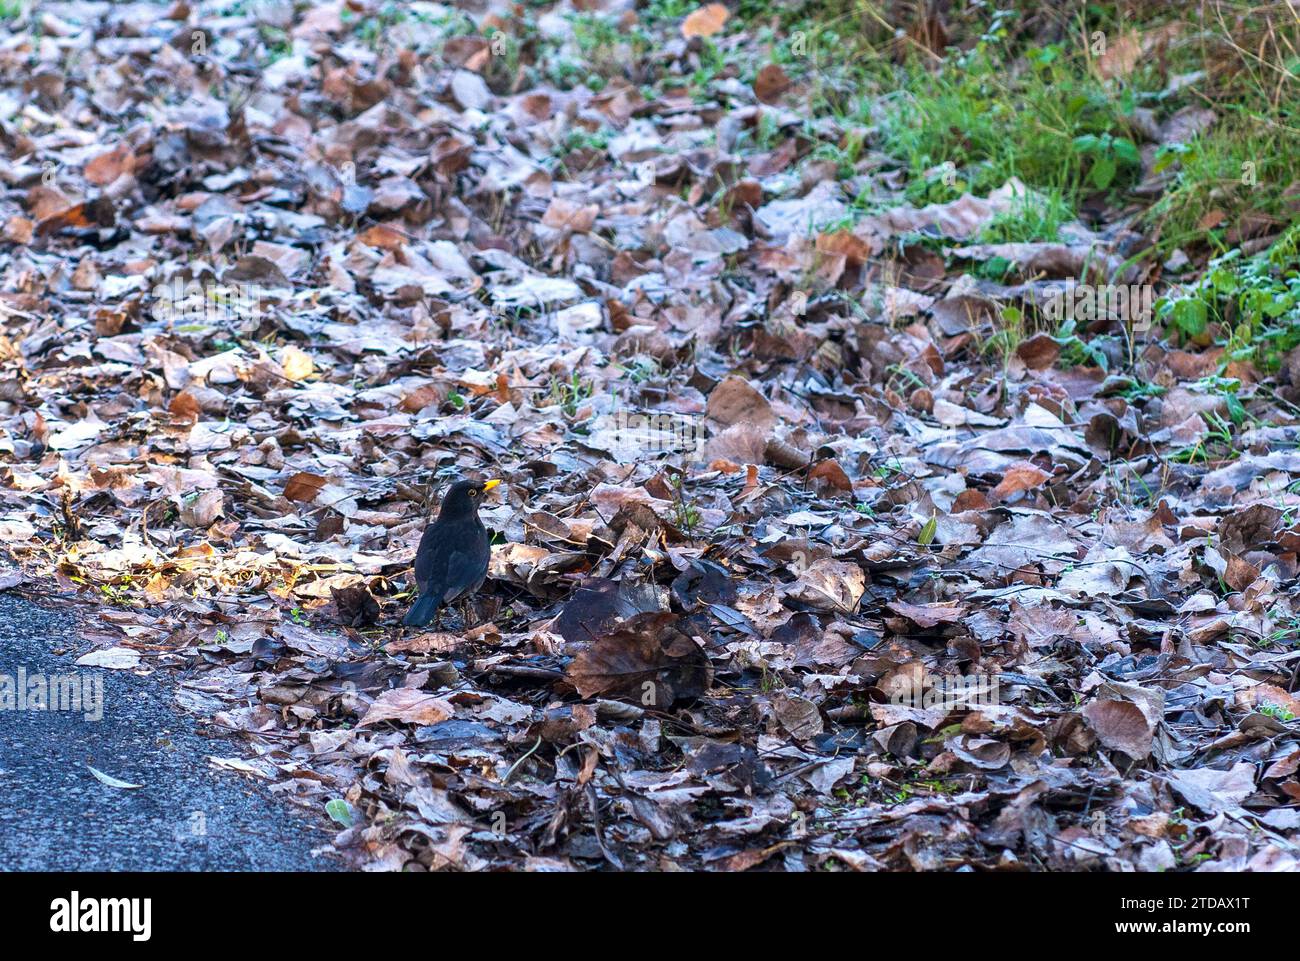 Common blackbird searches for food under the dried leaves, on the ground. Bird with yellow beak. Turdus merula. Black Thrush. Stock Photo